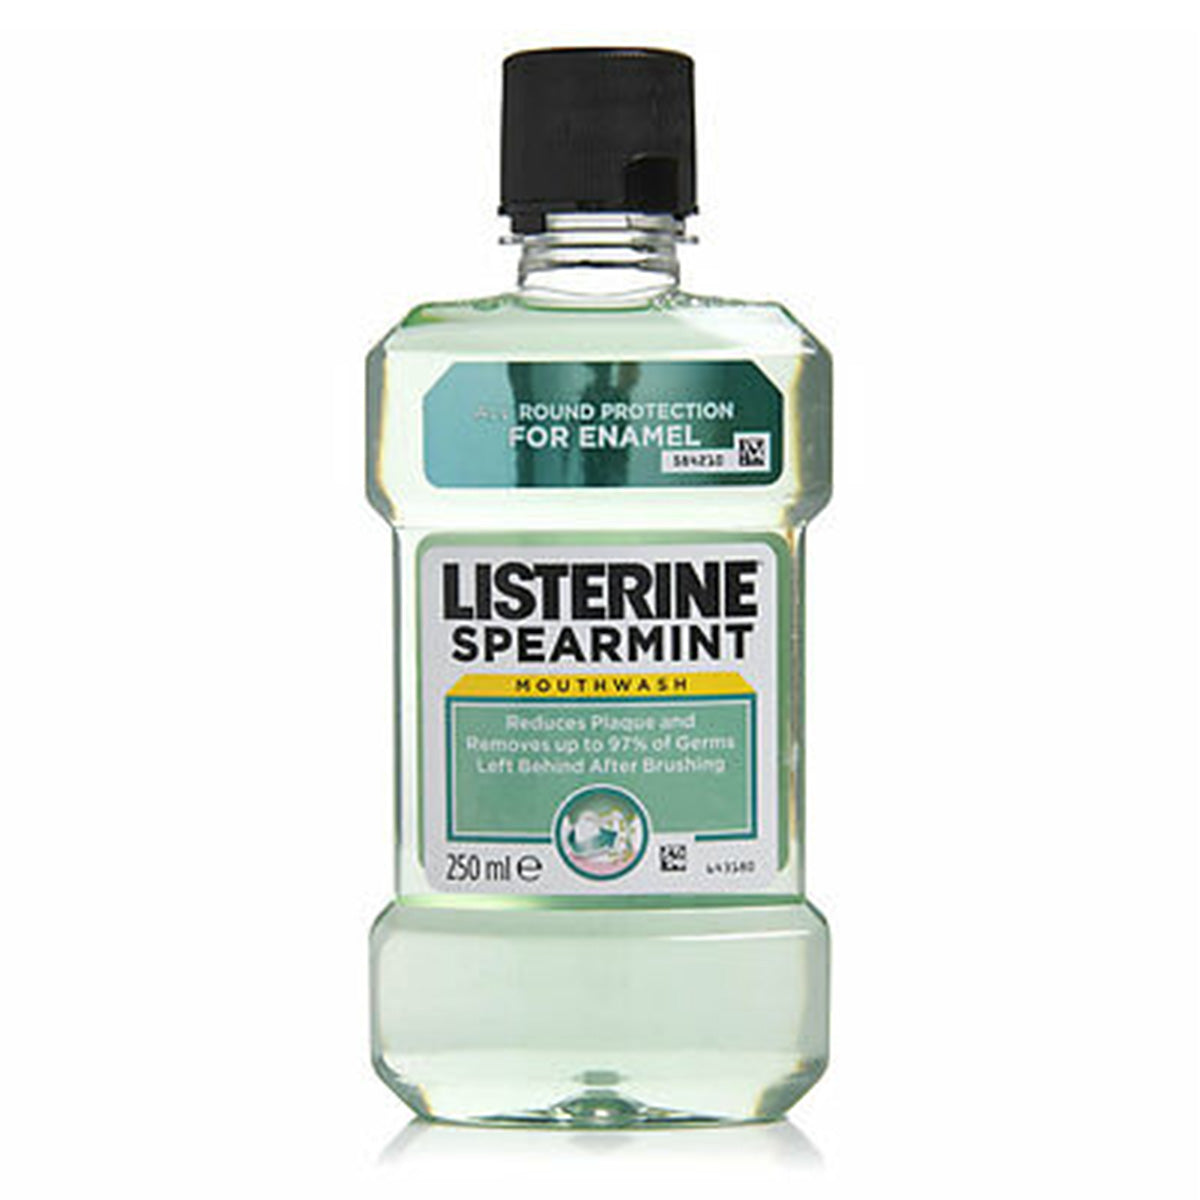 Listerine - Spearmint Mouthwash - 250ml - Continental Food Store